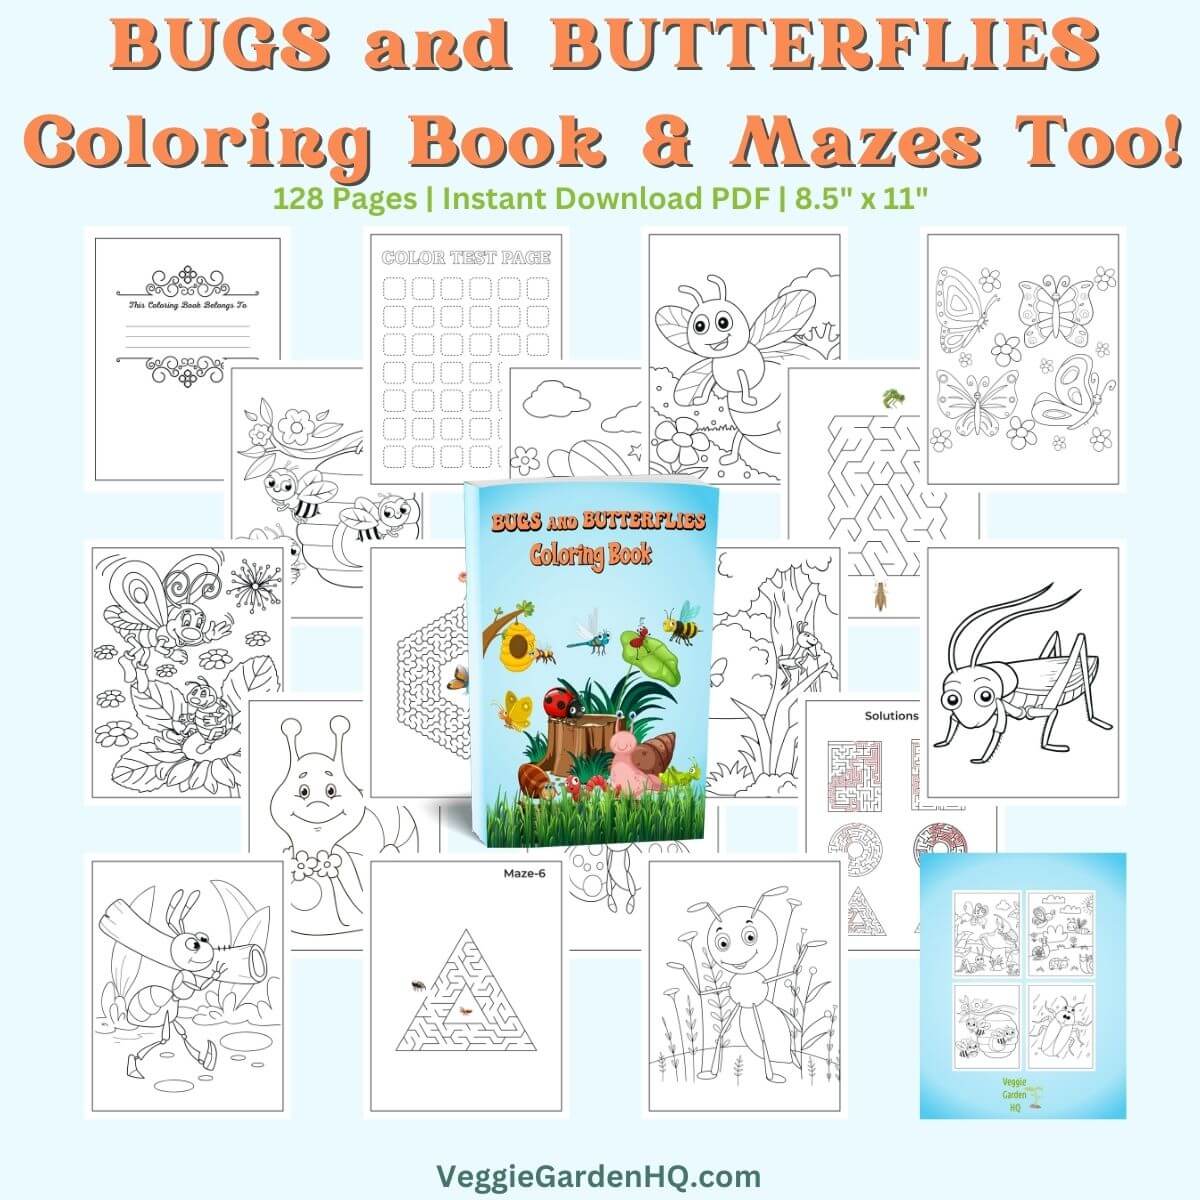 Bugs and Butterflies printable coloring book